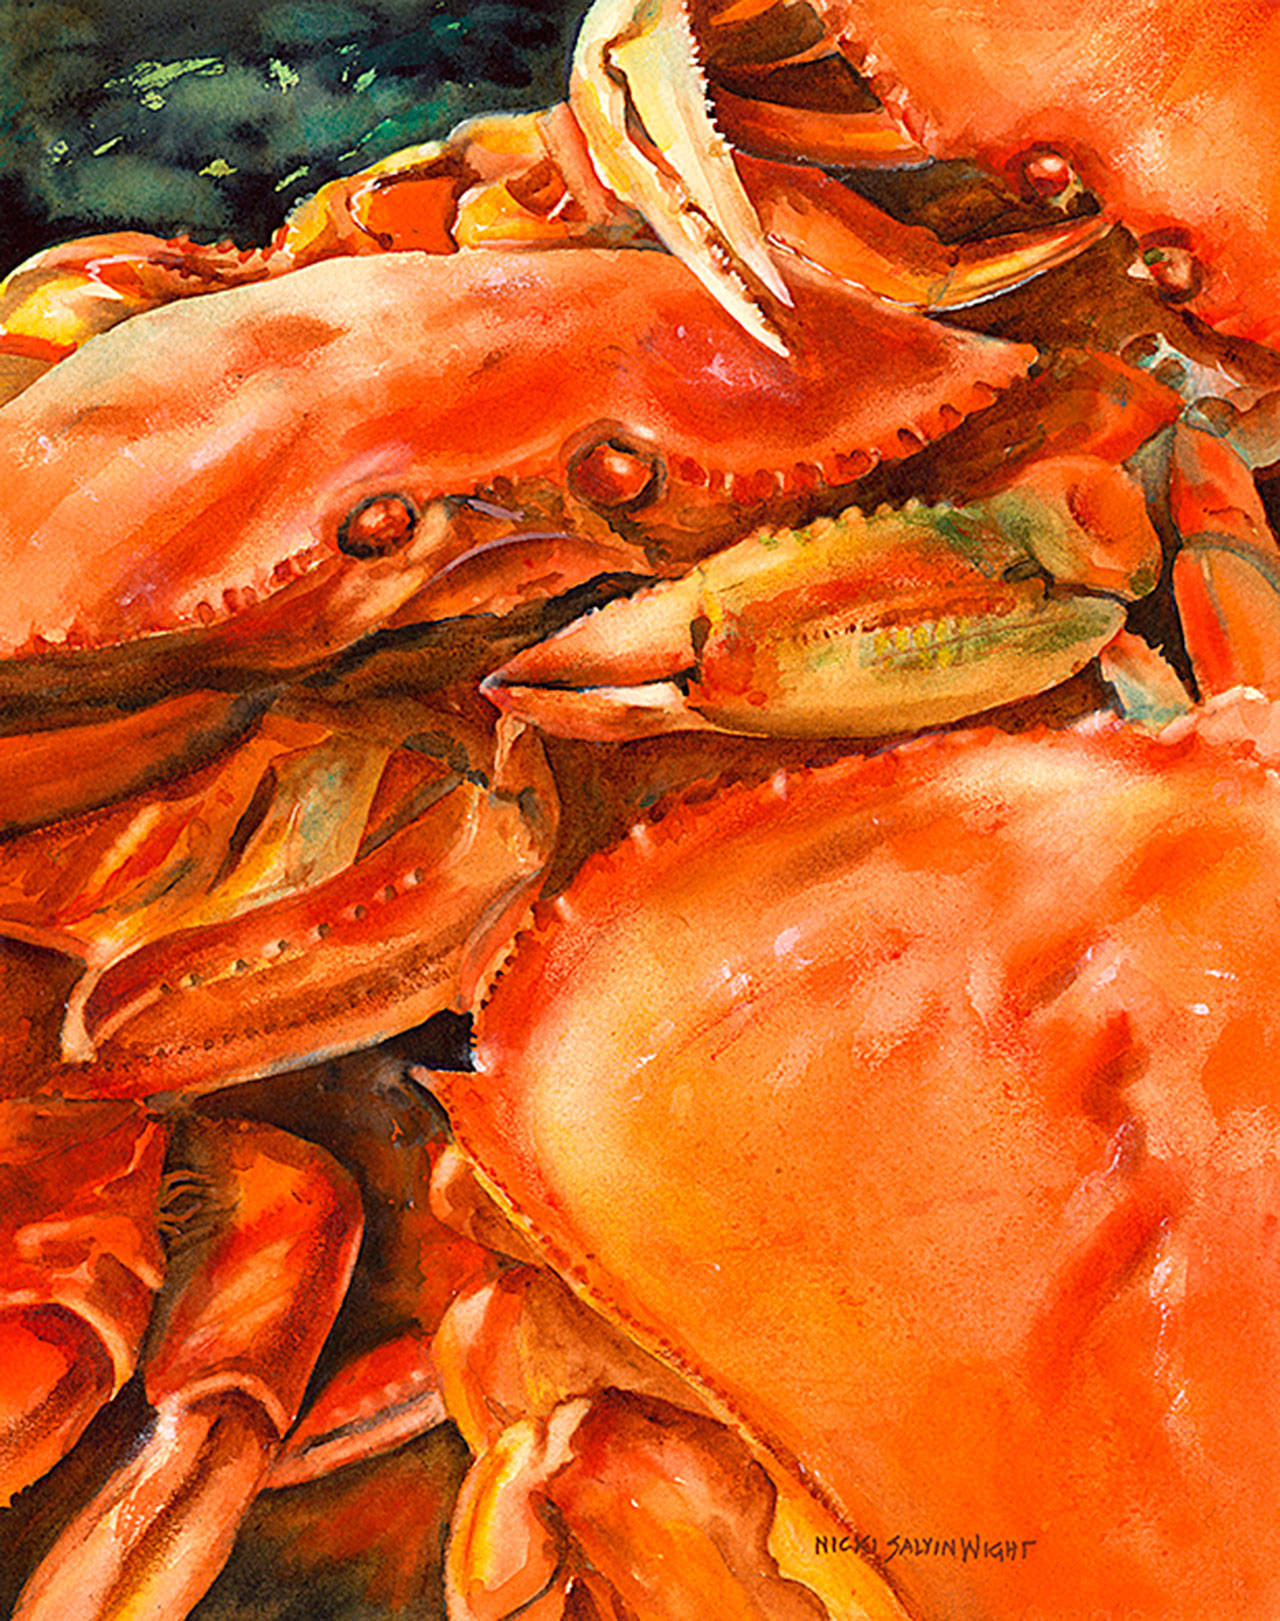 Nicki Salvin Wight’s “Crabs” is on the poster for this year’s Camano Island Studio Tour.